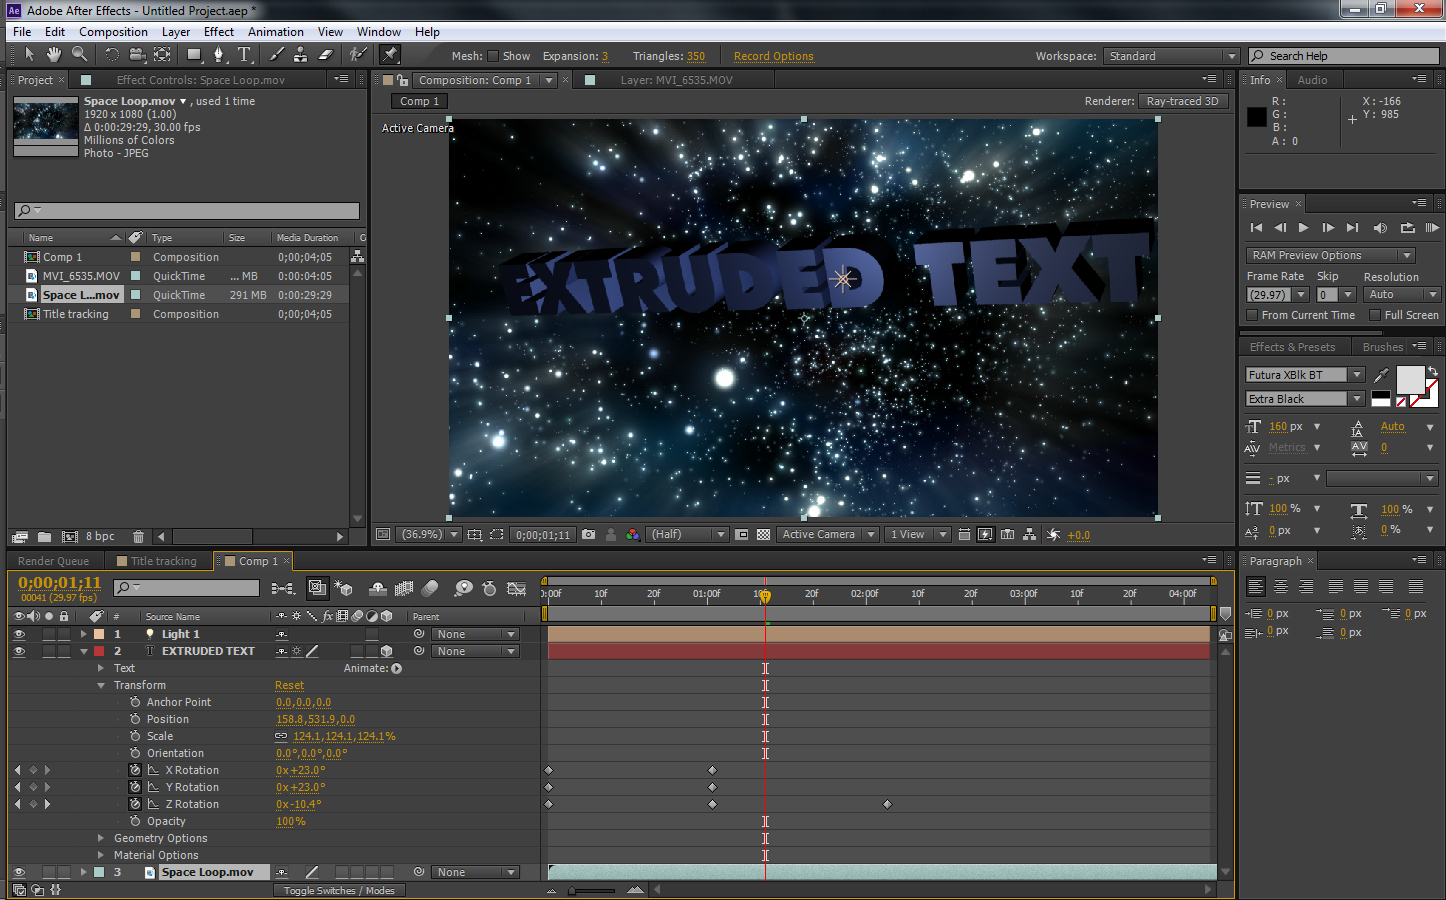 After effect ключи. Адоб Афтер эффект 2021. After Effects cs6. Adobe after Effects cs6. Программа after Effects.